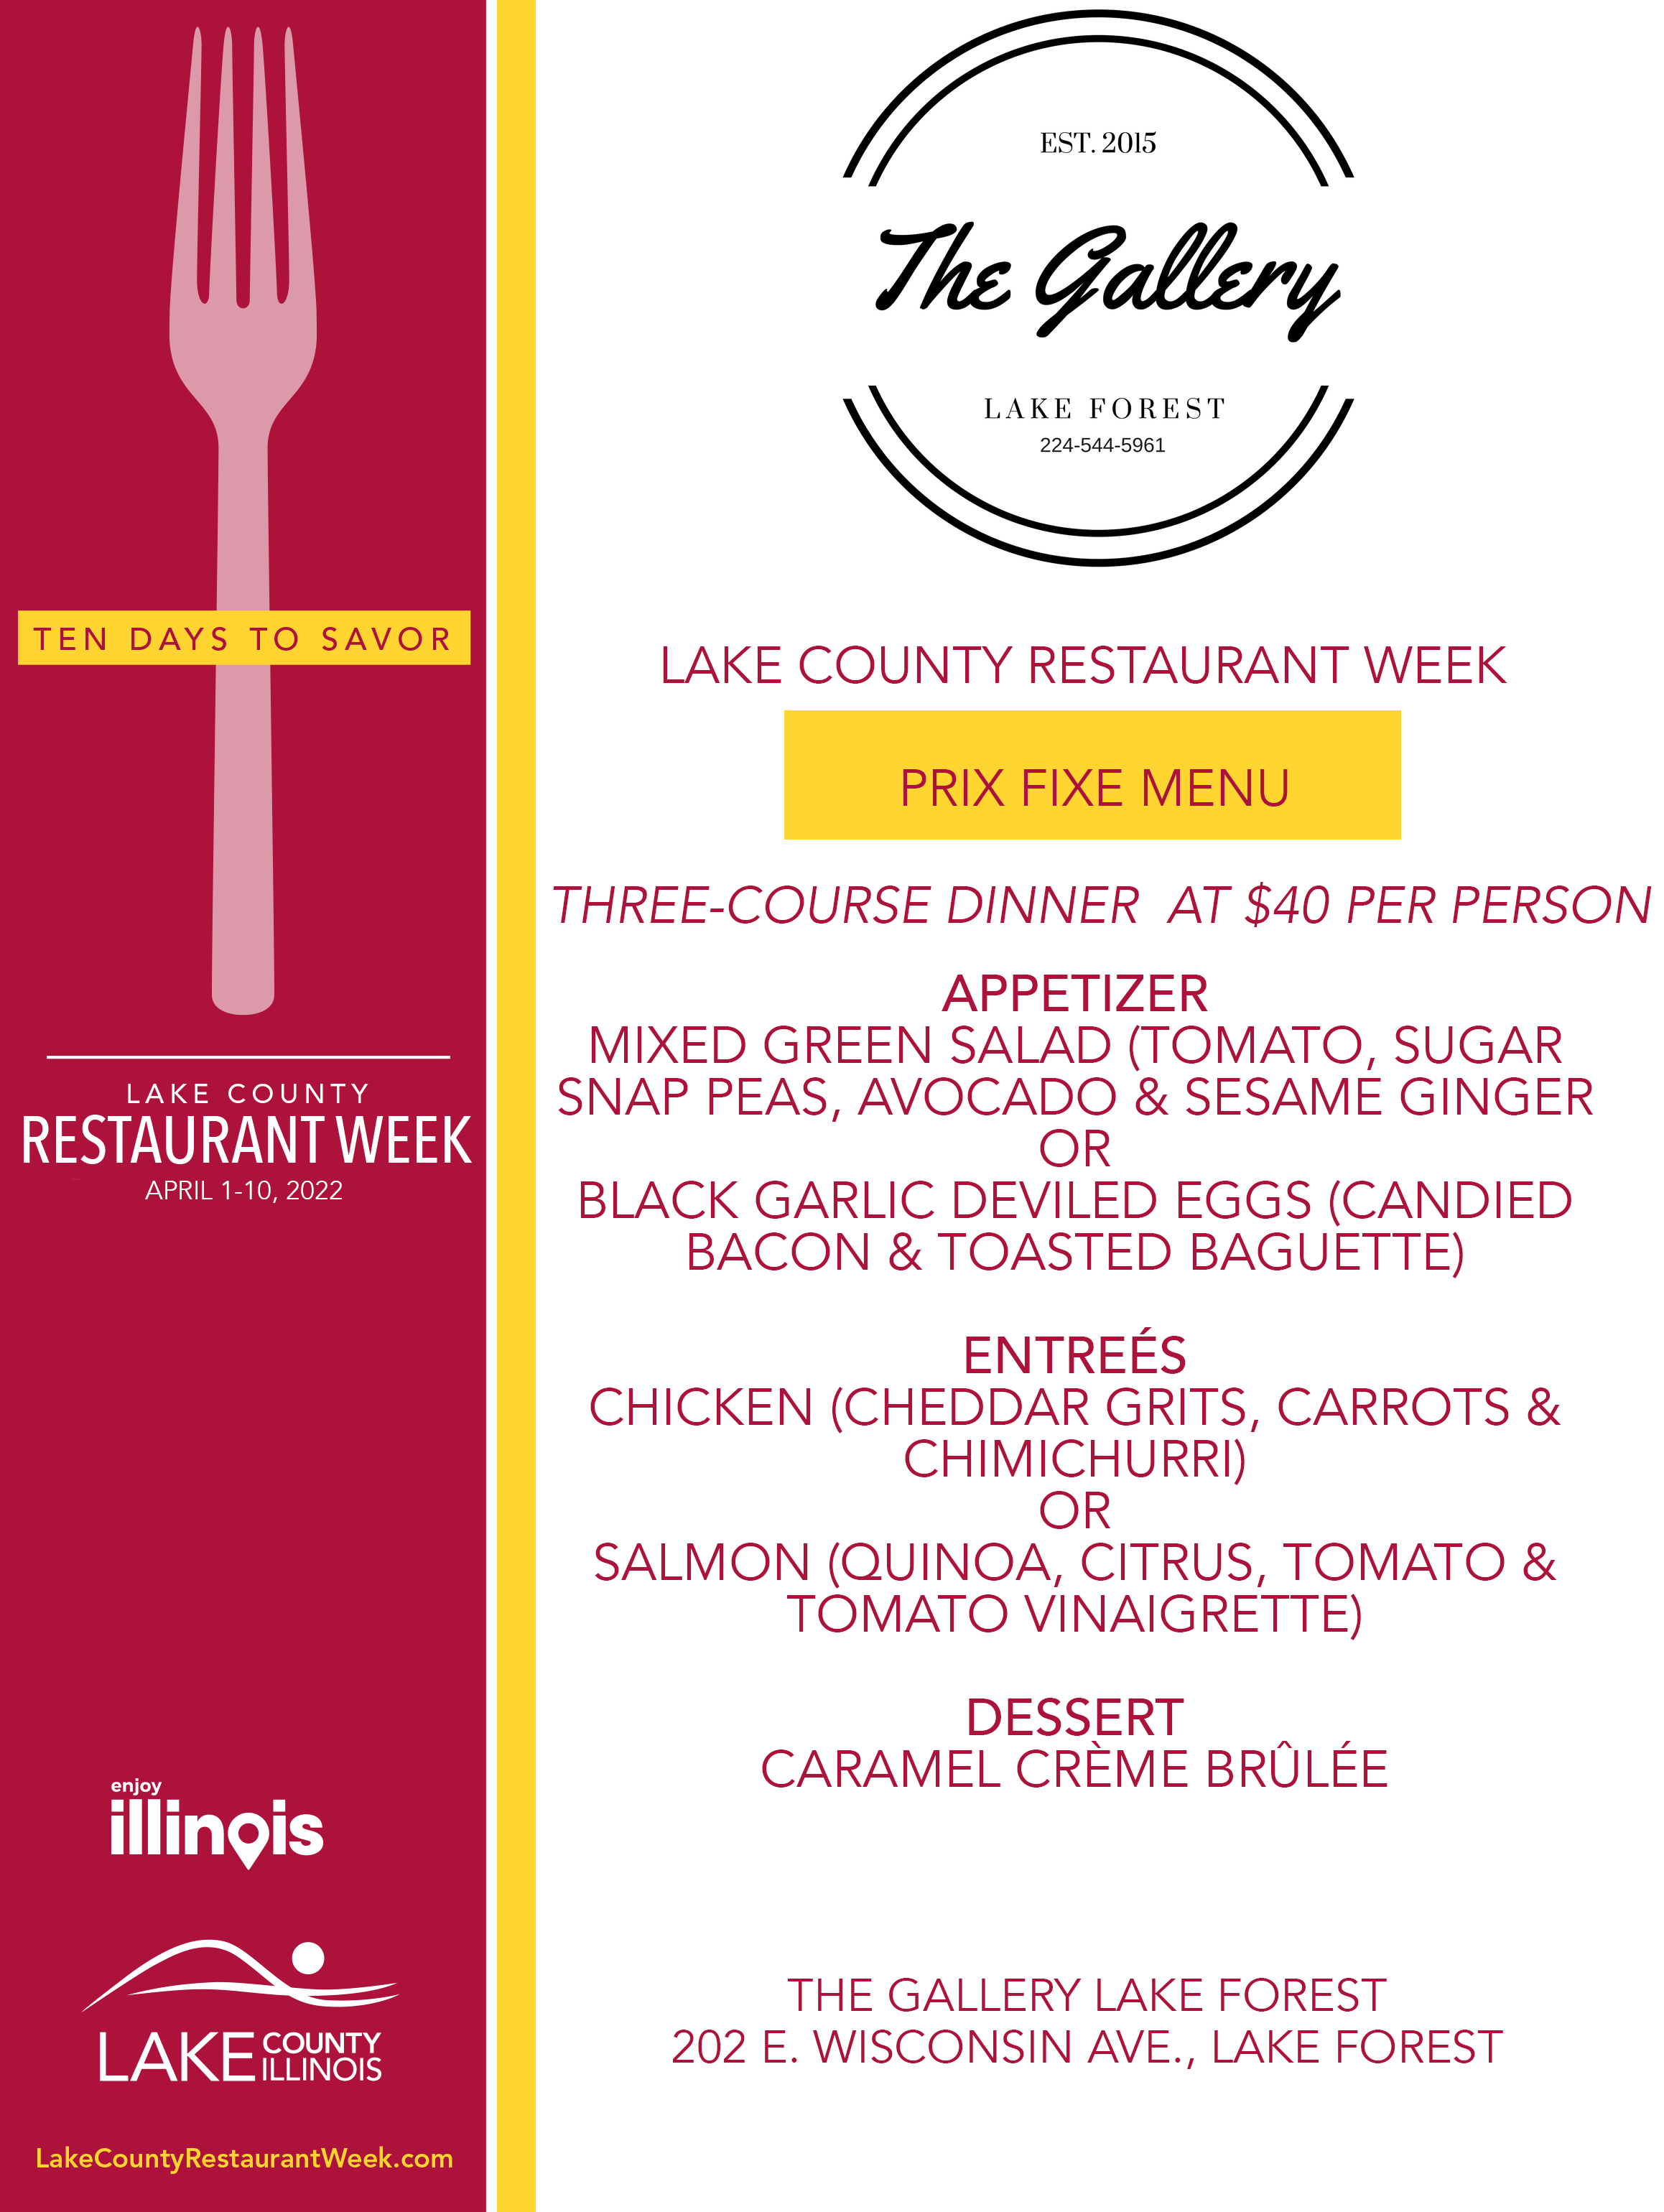 The Gallery Lake Forest Menu